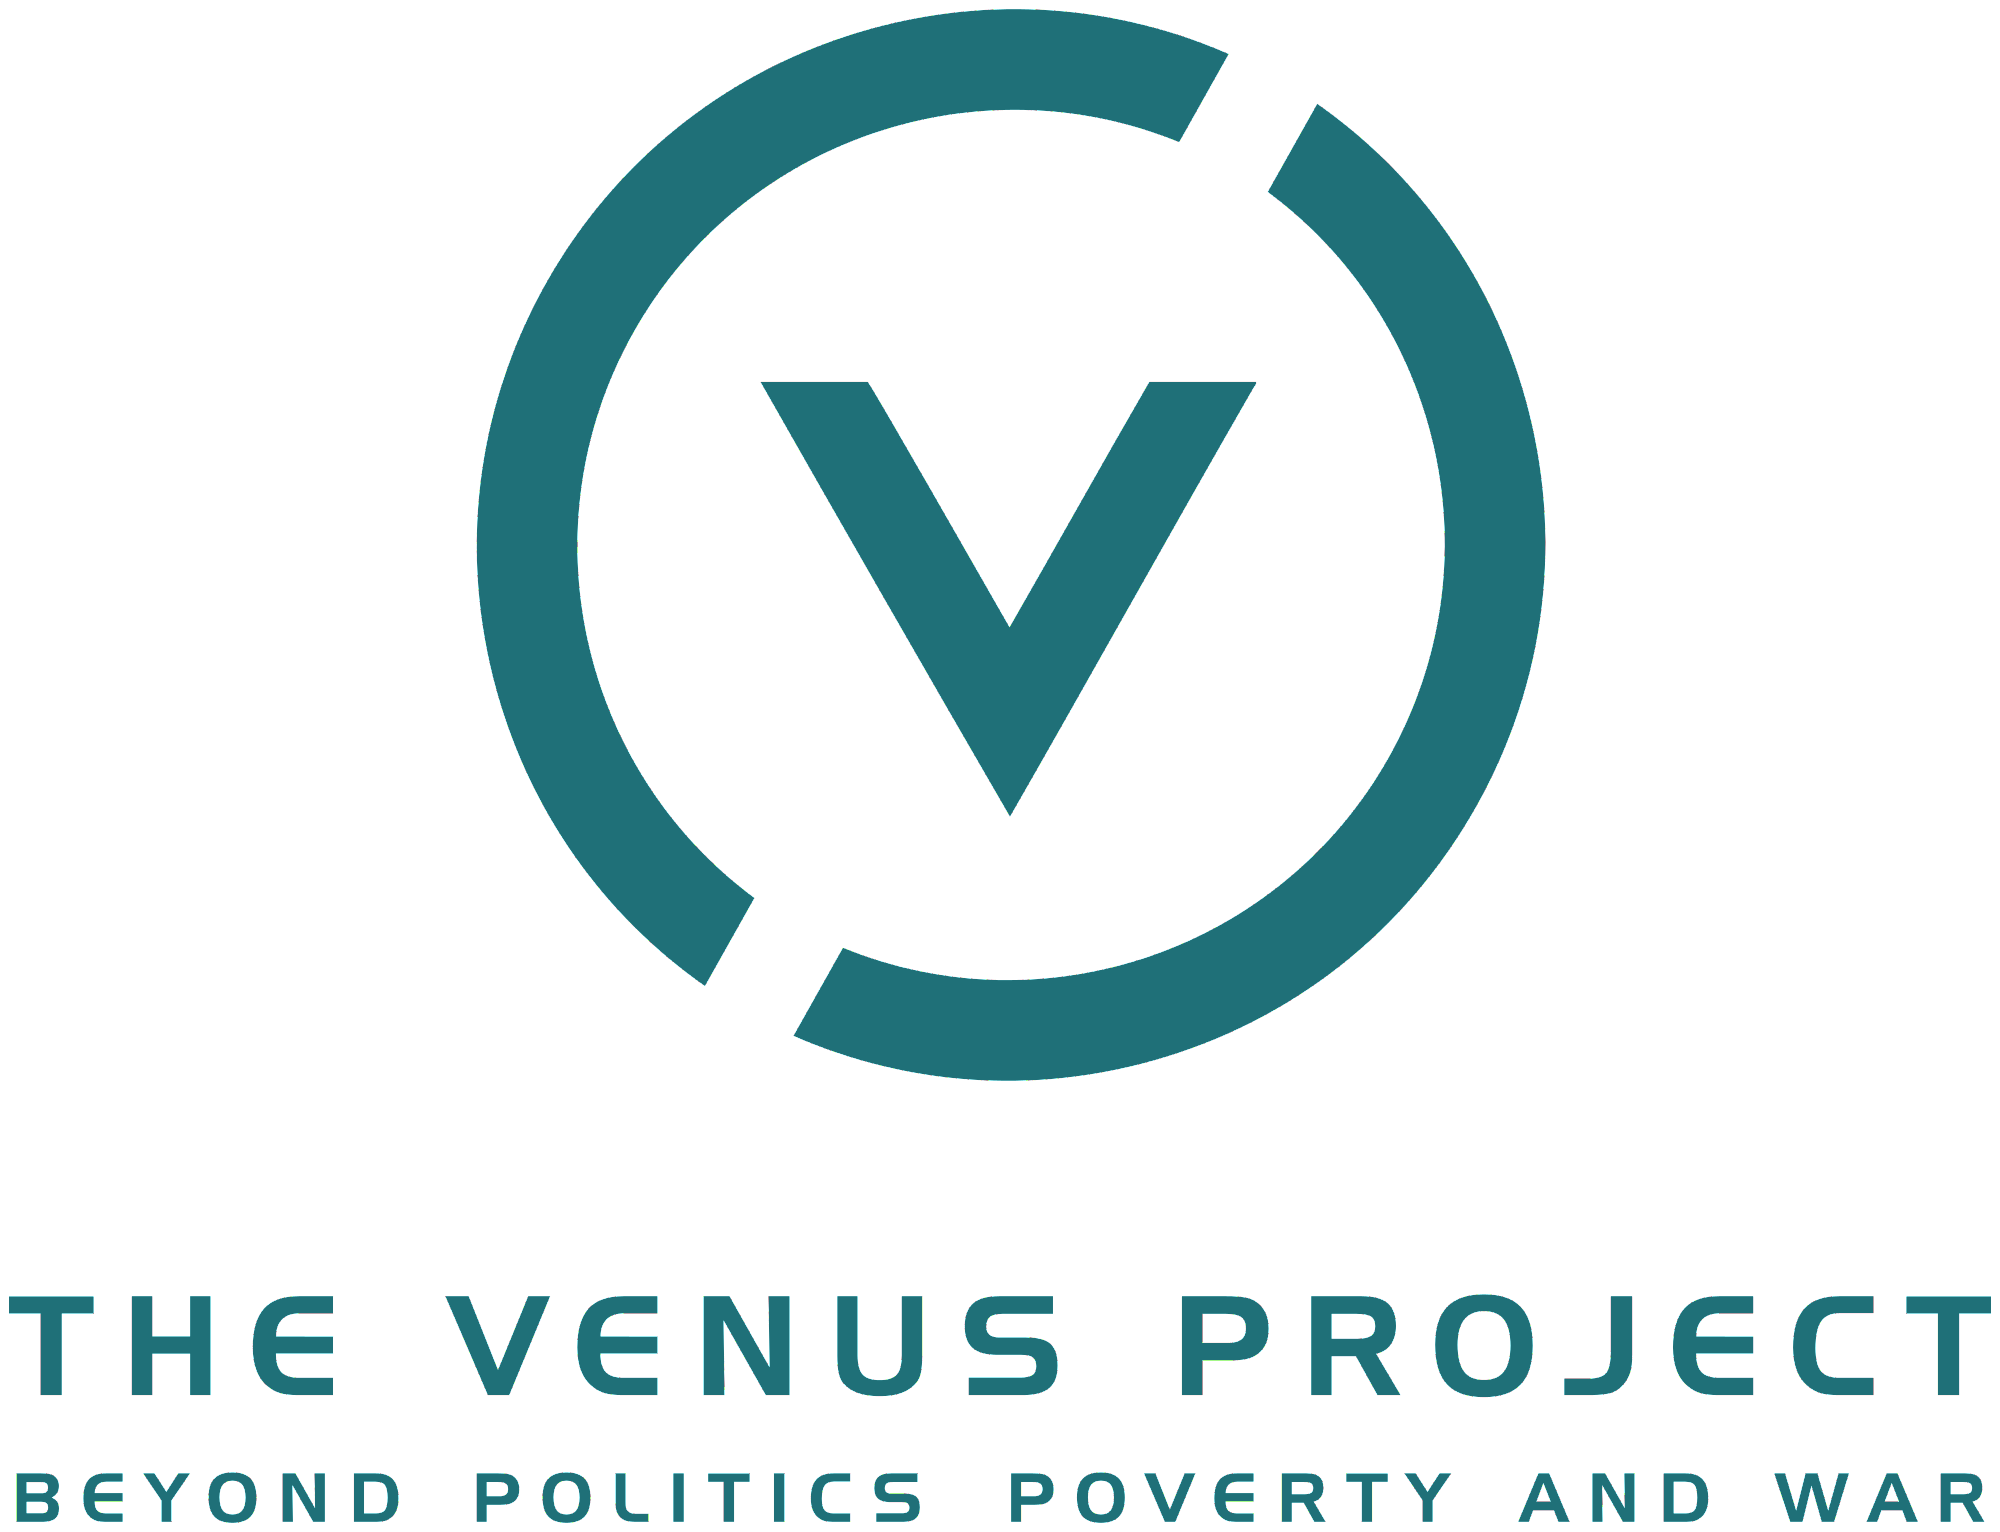 Venus Project Logo. A large V surrounded by a circular border. So, a V in a circle.